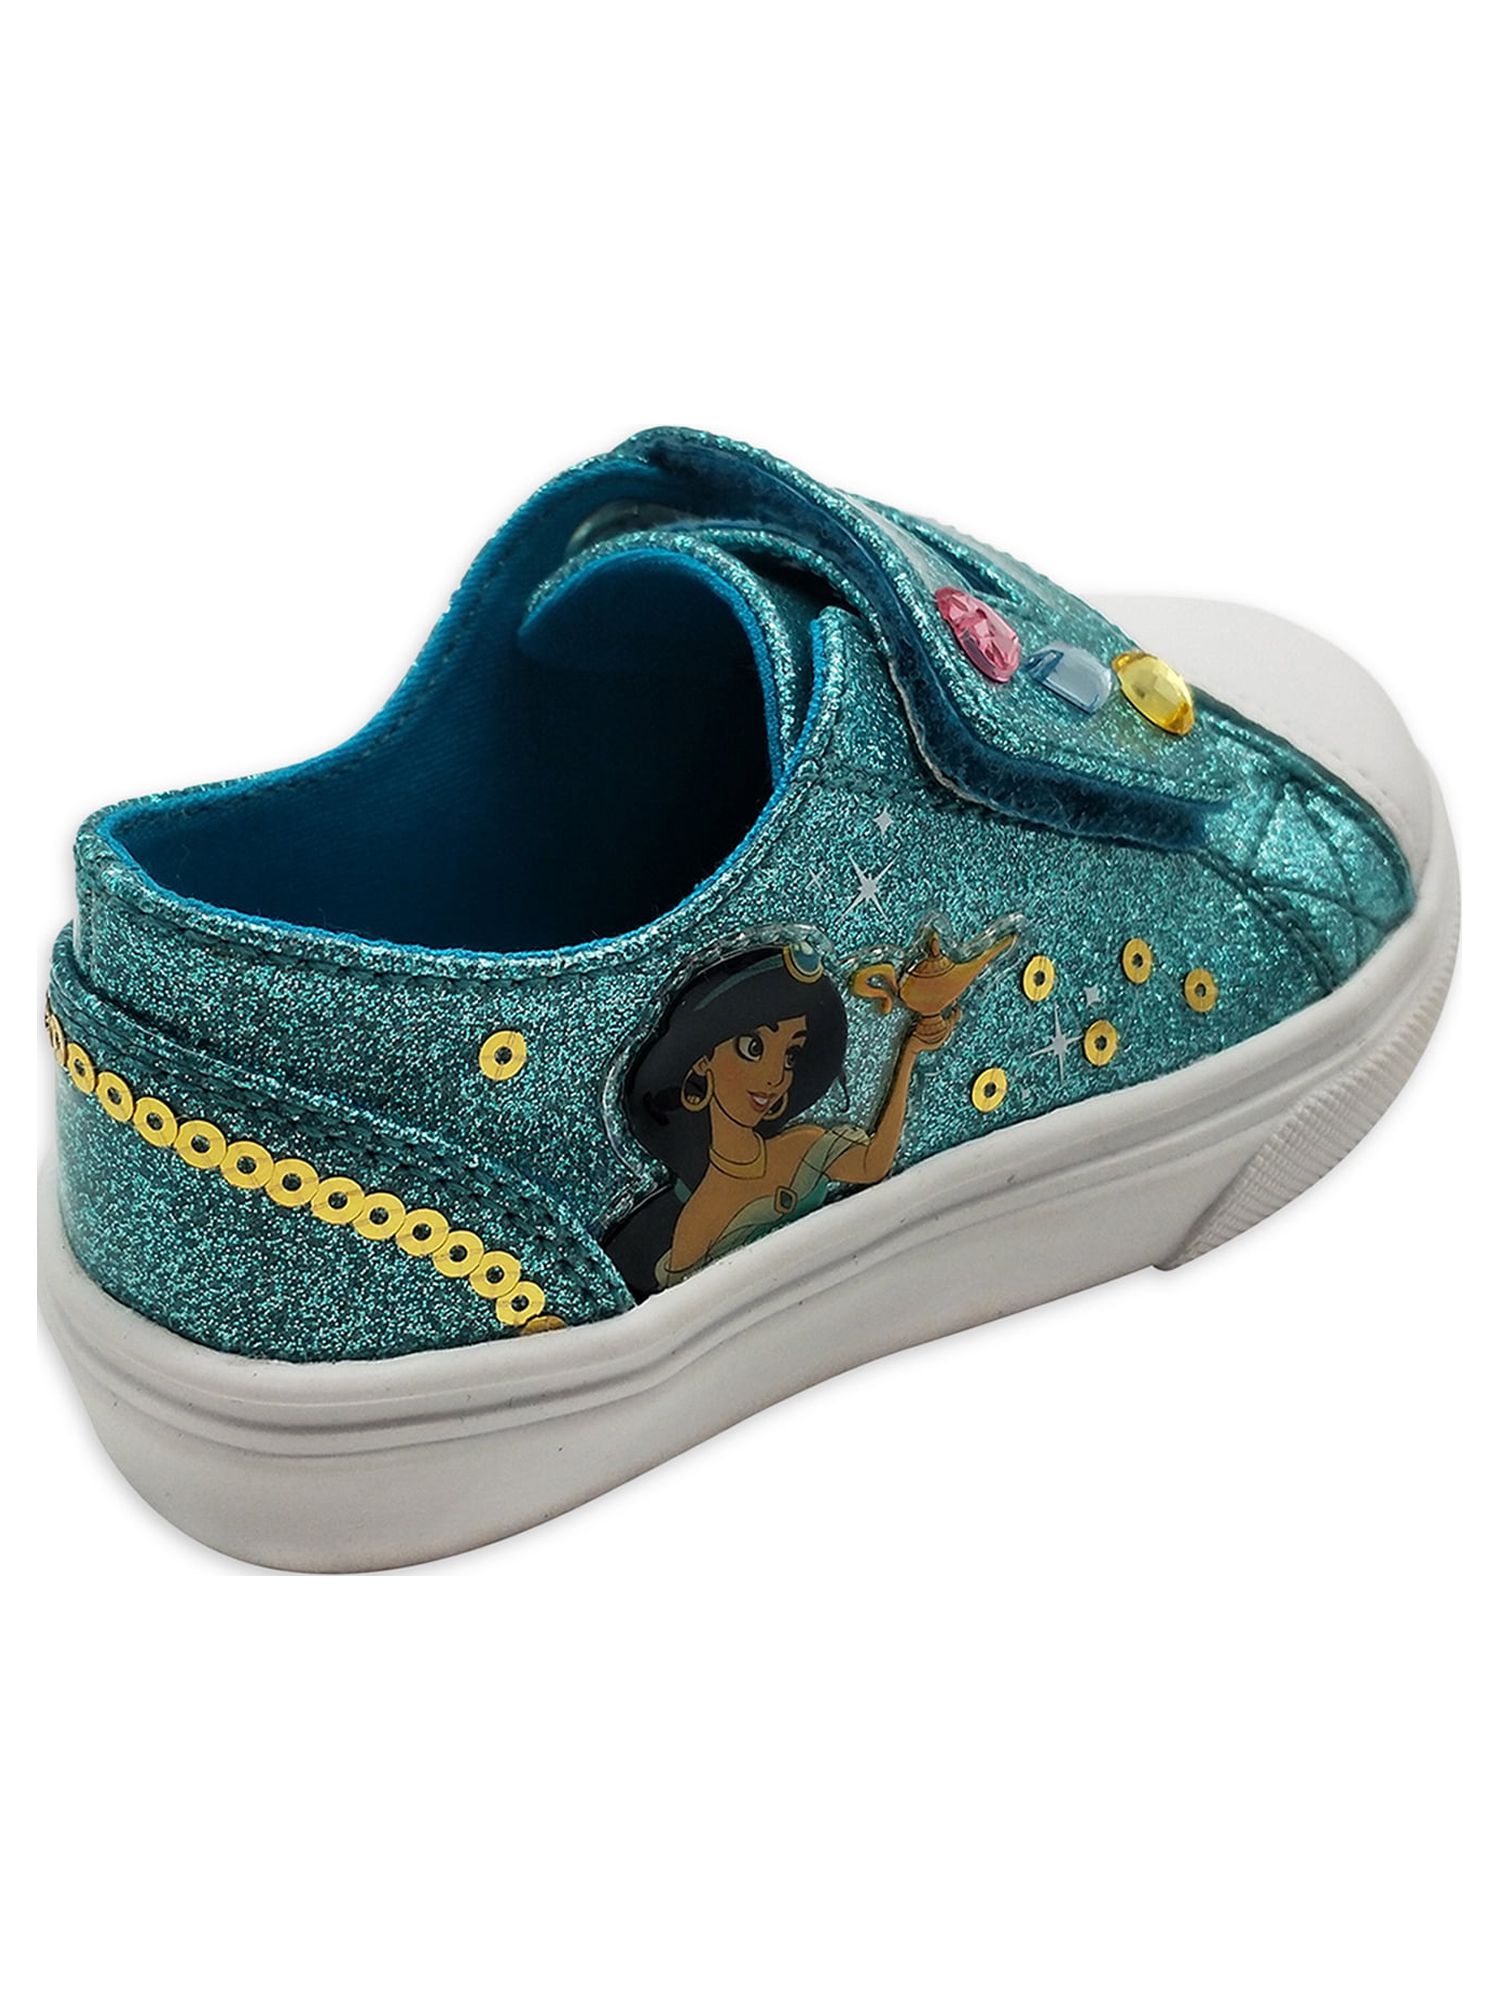 Disney Toddler Girls Aladdin Strap Casual Sneakers, Sizes 7-12 - image 5 of 6